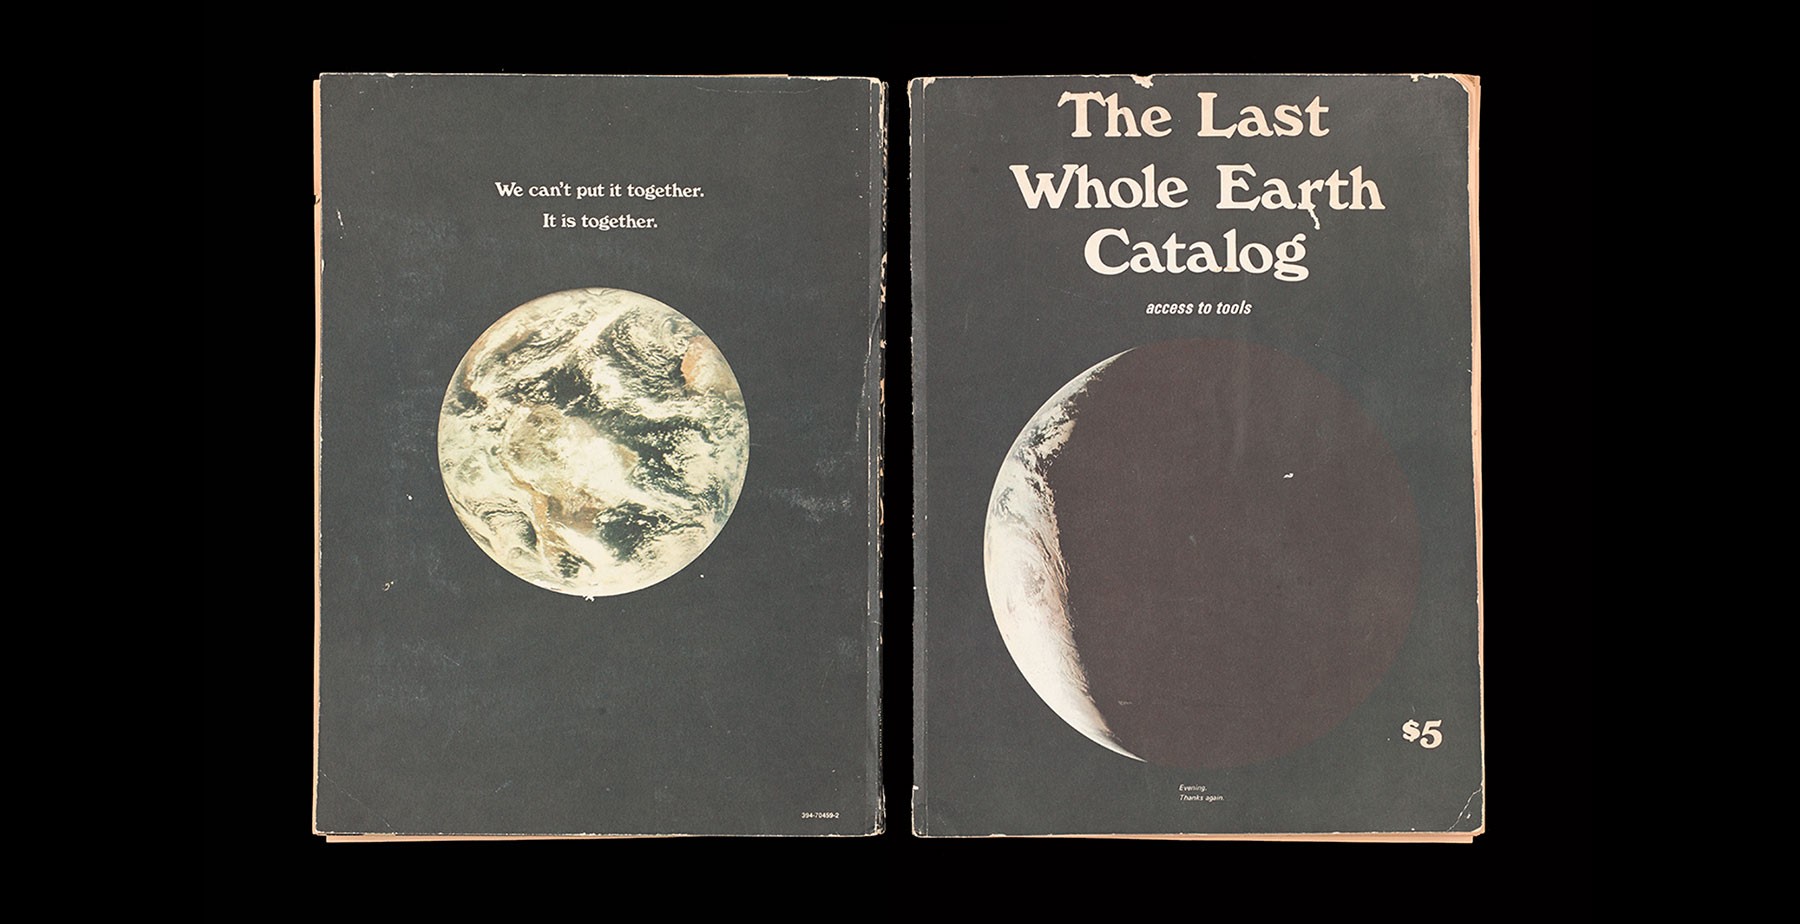 the-last-whole-earth-catalog-access-to-tools-stewart-brand